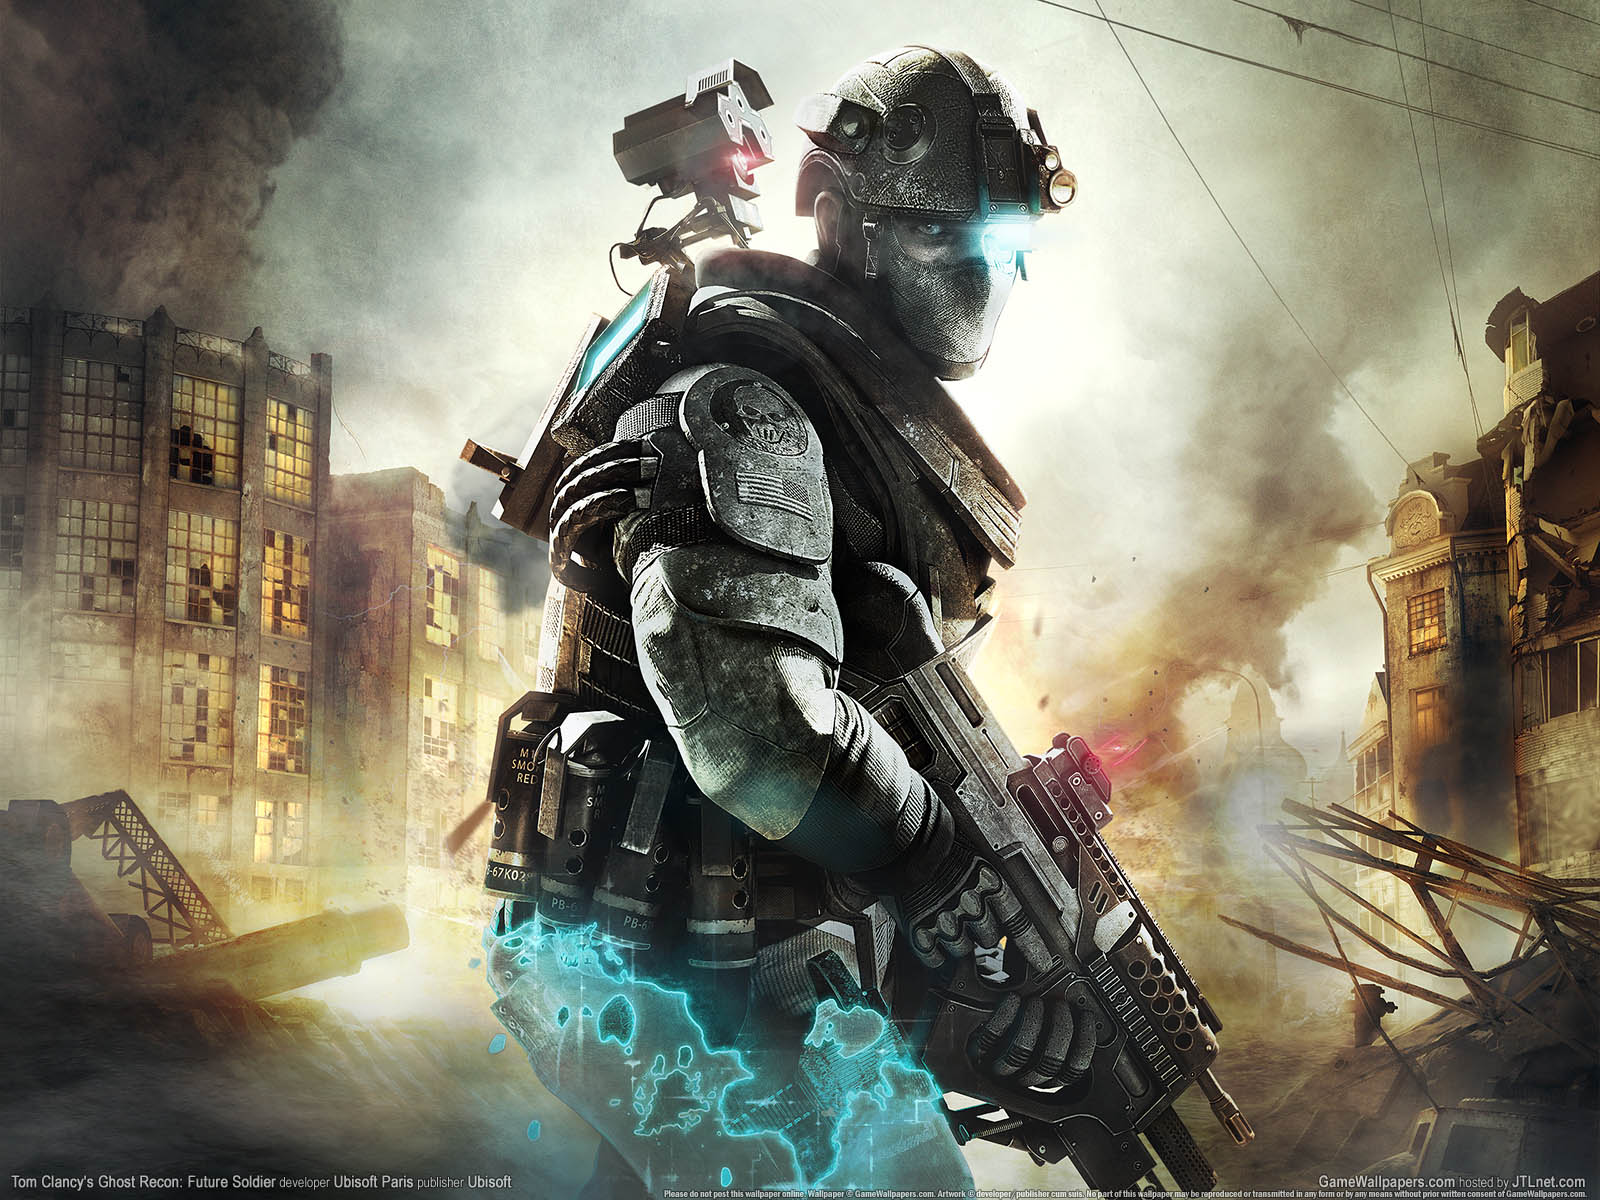 Tom Clancy%27s Ghost Recon%3A Future Soldier fond d'cran 02 1600x1200